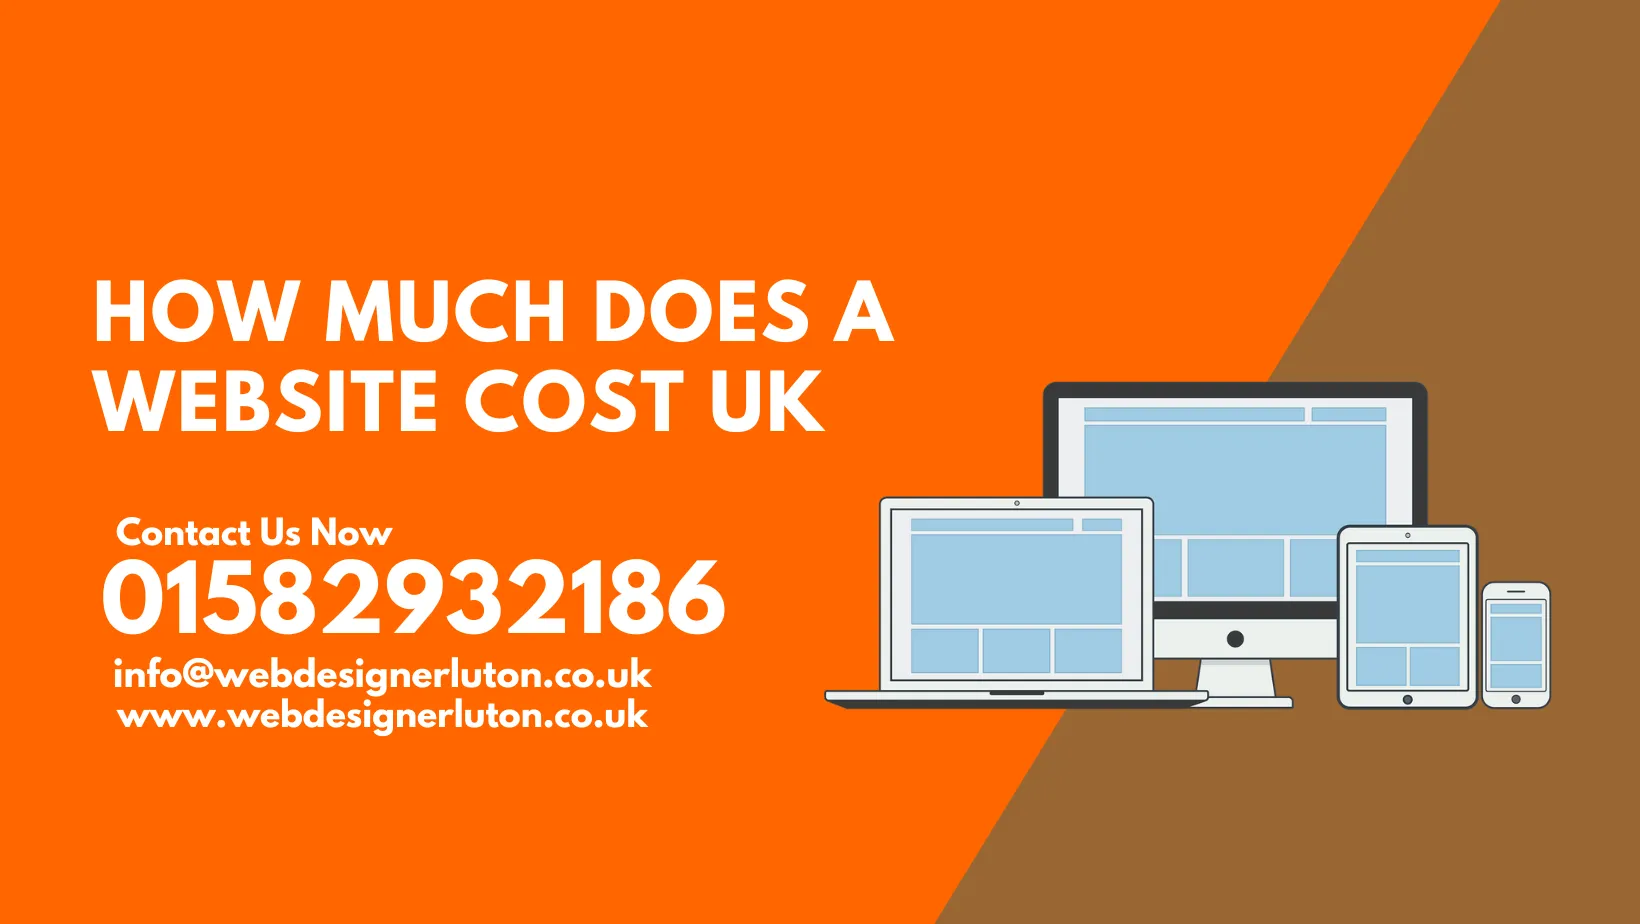 How Much Does A Website Cost UK